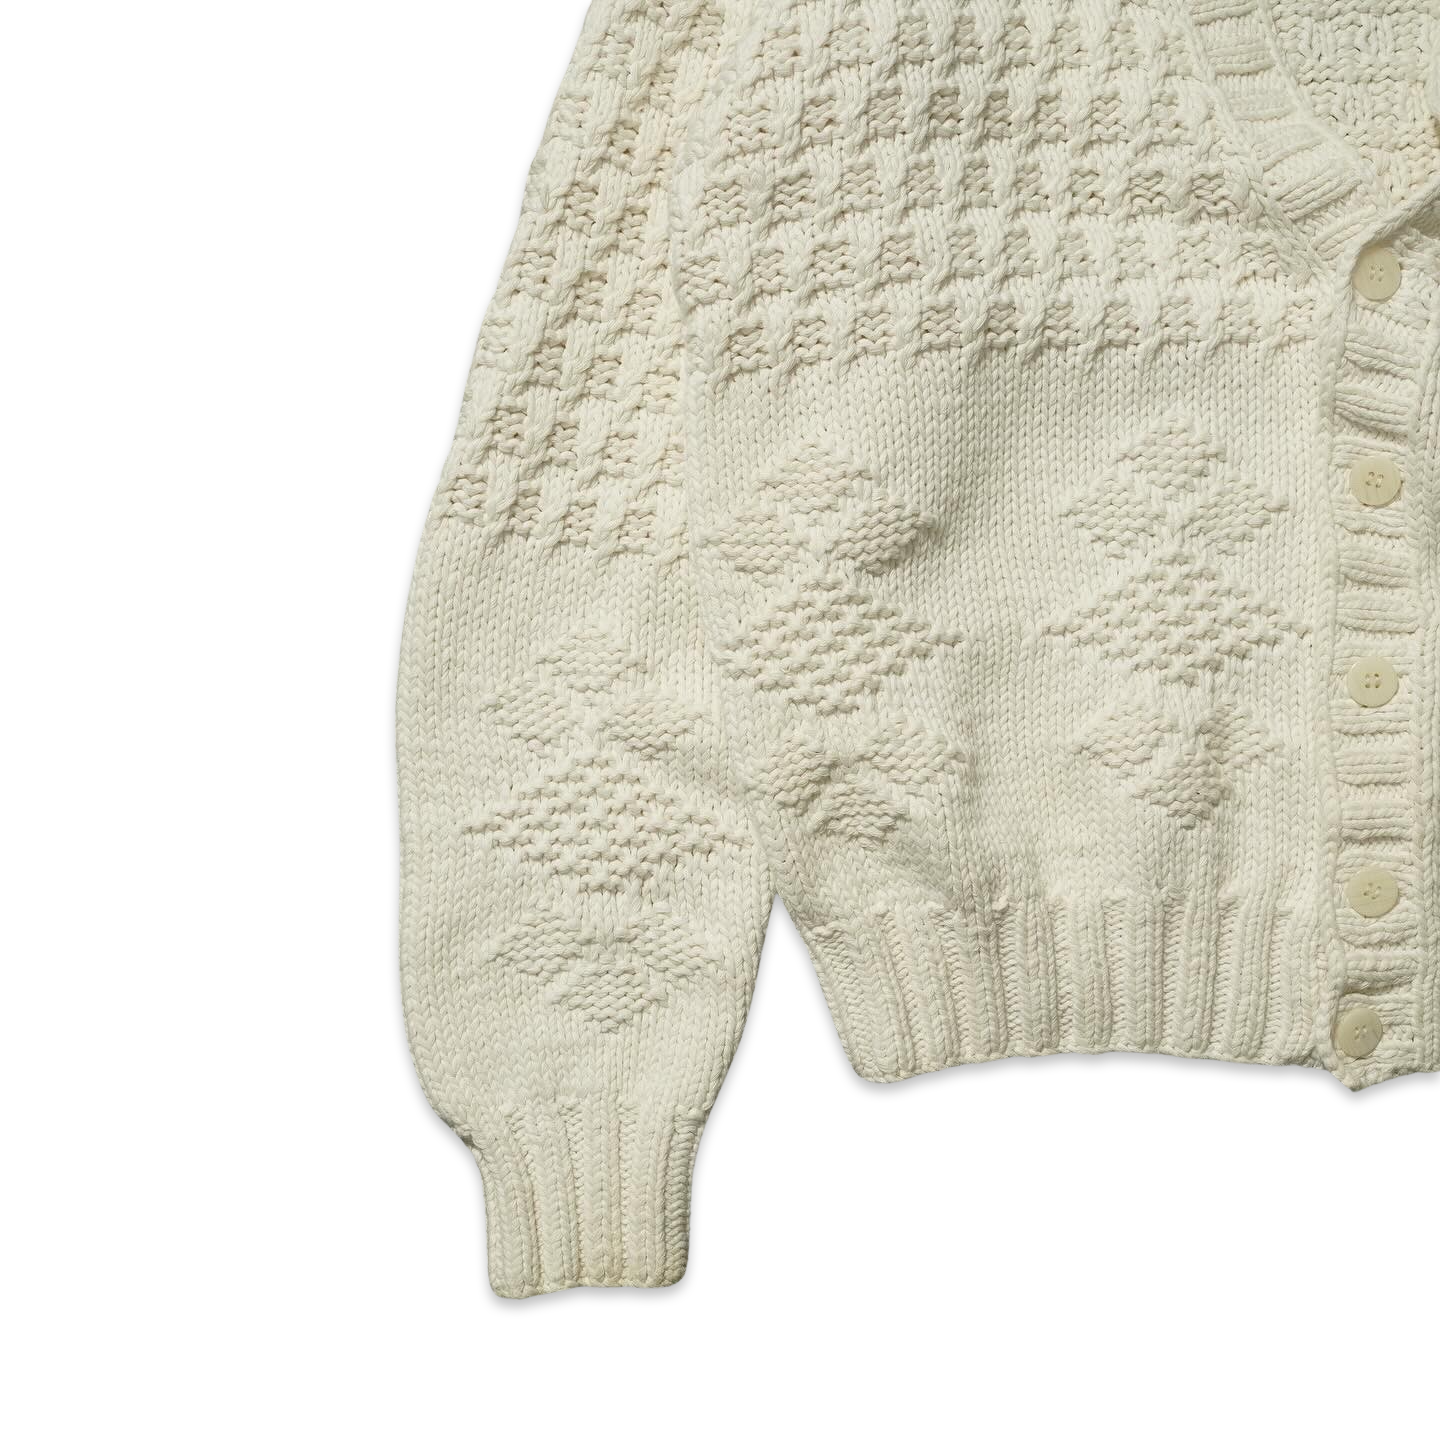 GAP Hand Knitted Cotton Cardigan